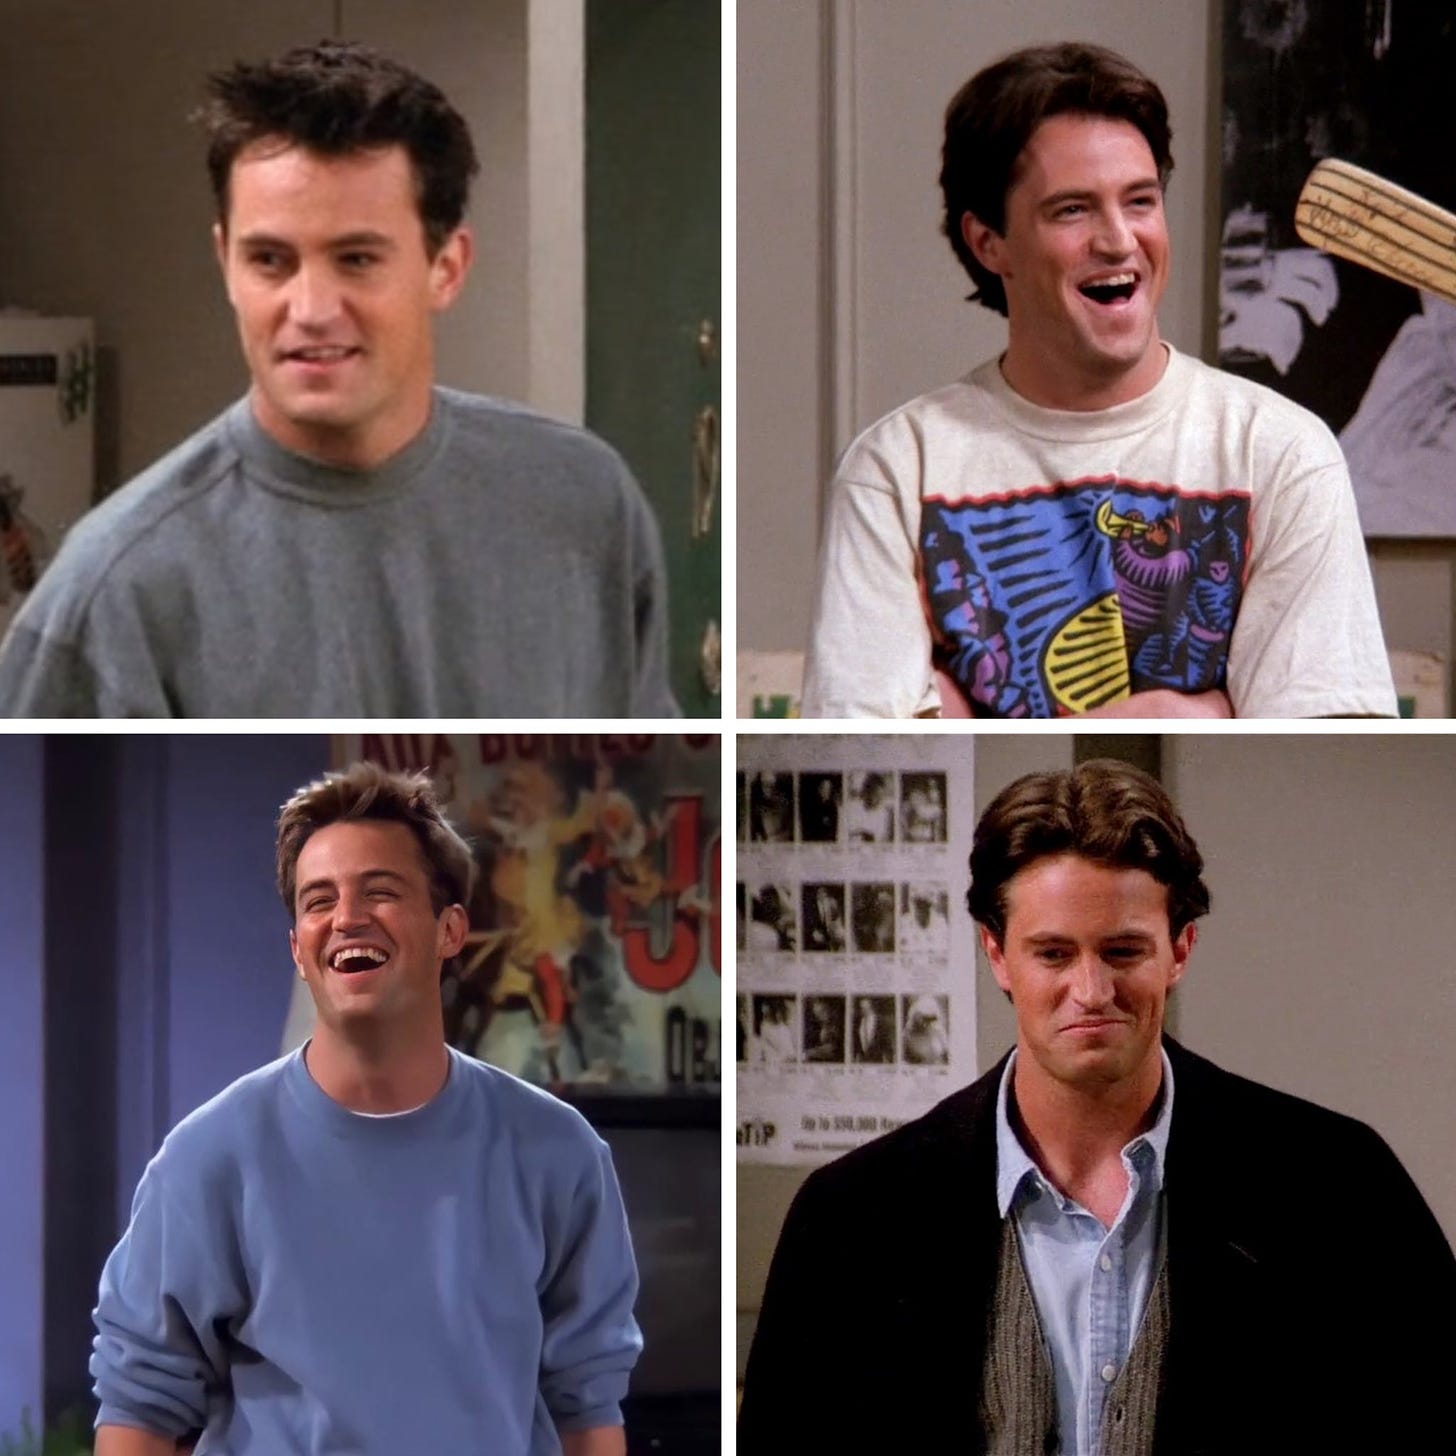 Trendulkar on X: "Chandler Bing introduced sarcasm in our lives. Iconic  &amp; timeless. RIP Matthew Perry. https://t.co/D8lCiX8ydd" / X